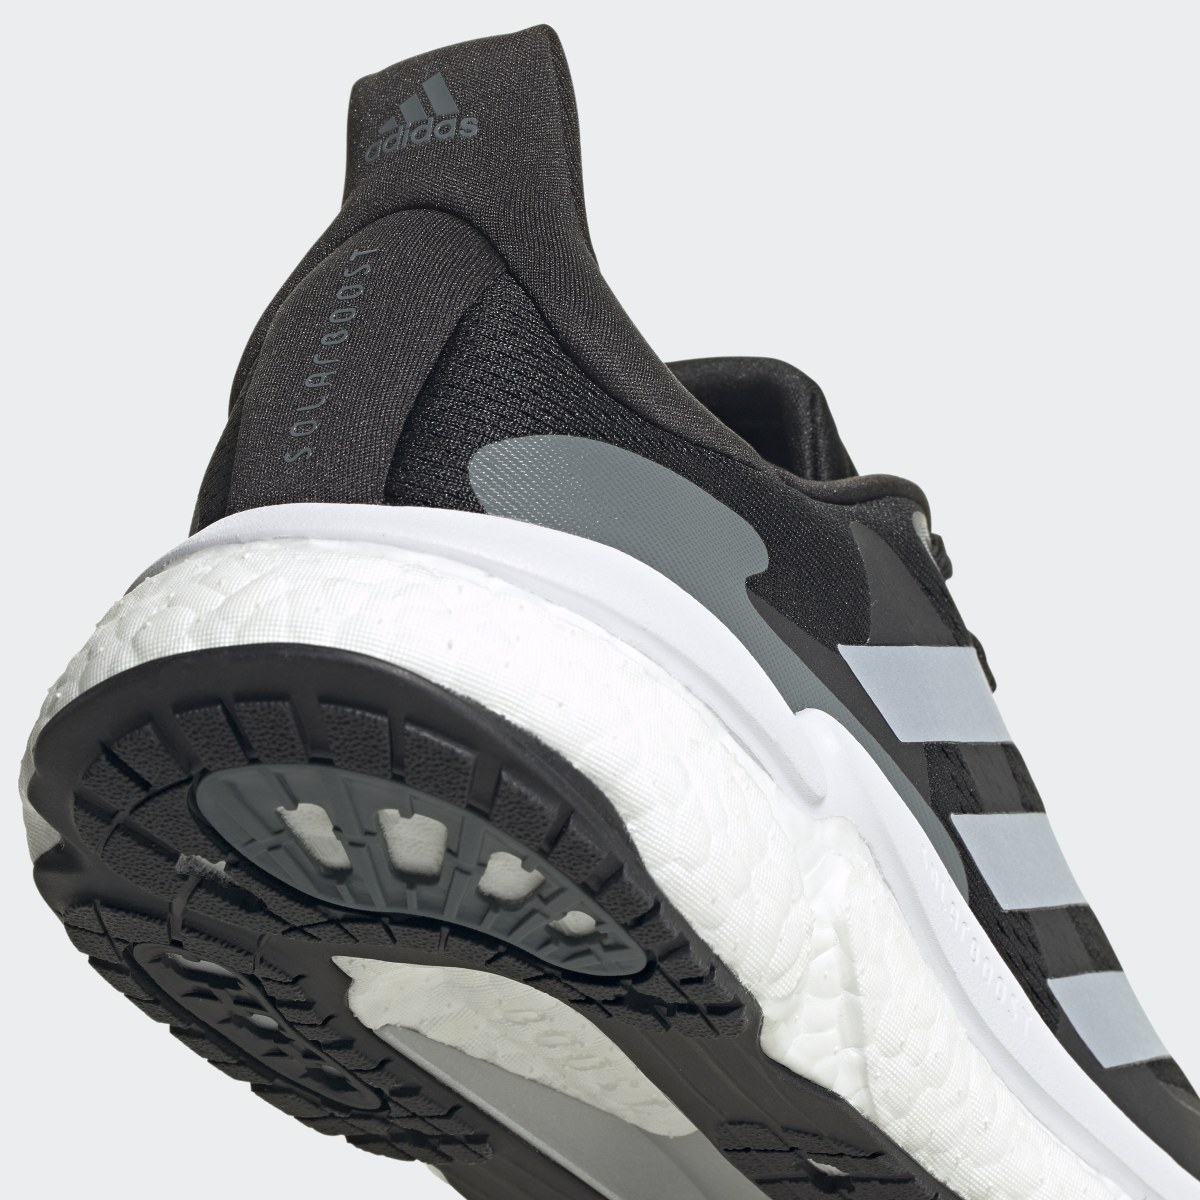 Adidas SolarBoost 3 Shoes. 11